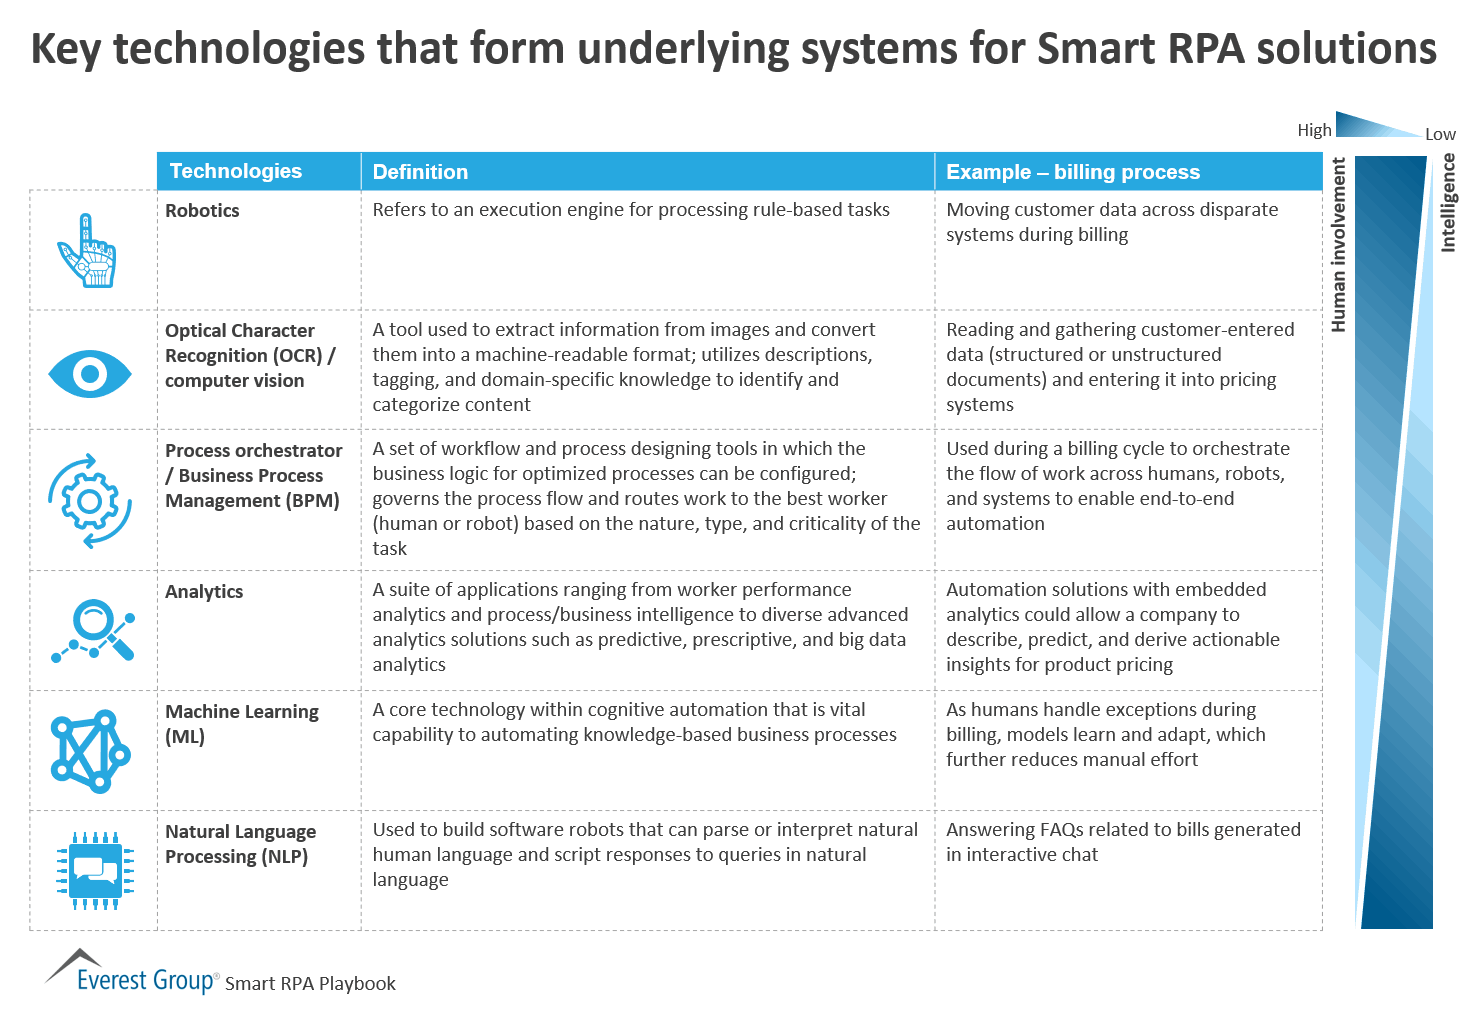 Key technologies that form underlying systems for Smart RPA solutions